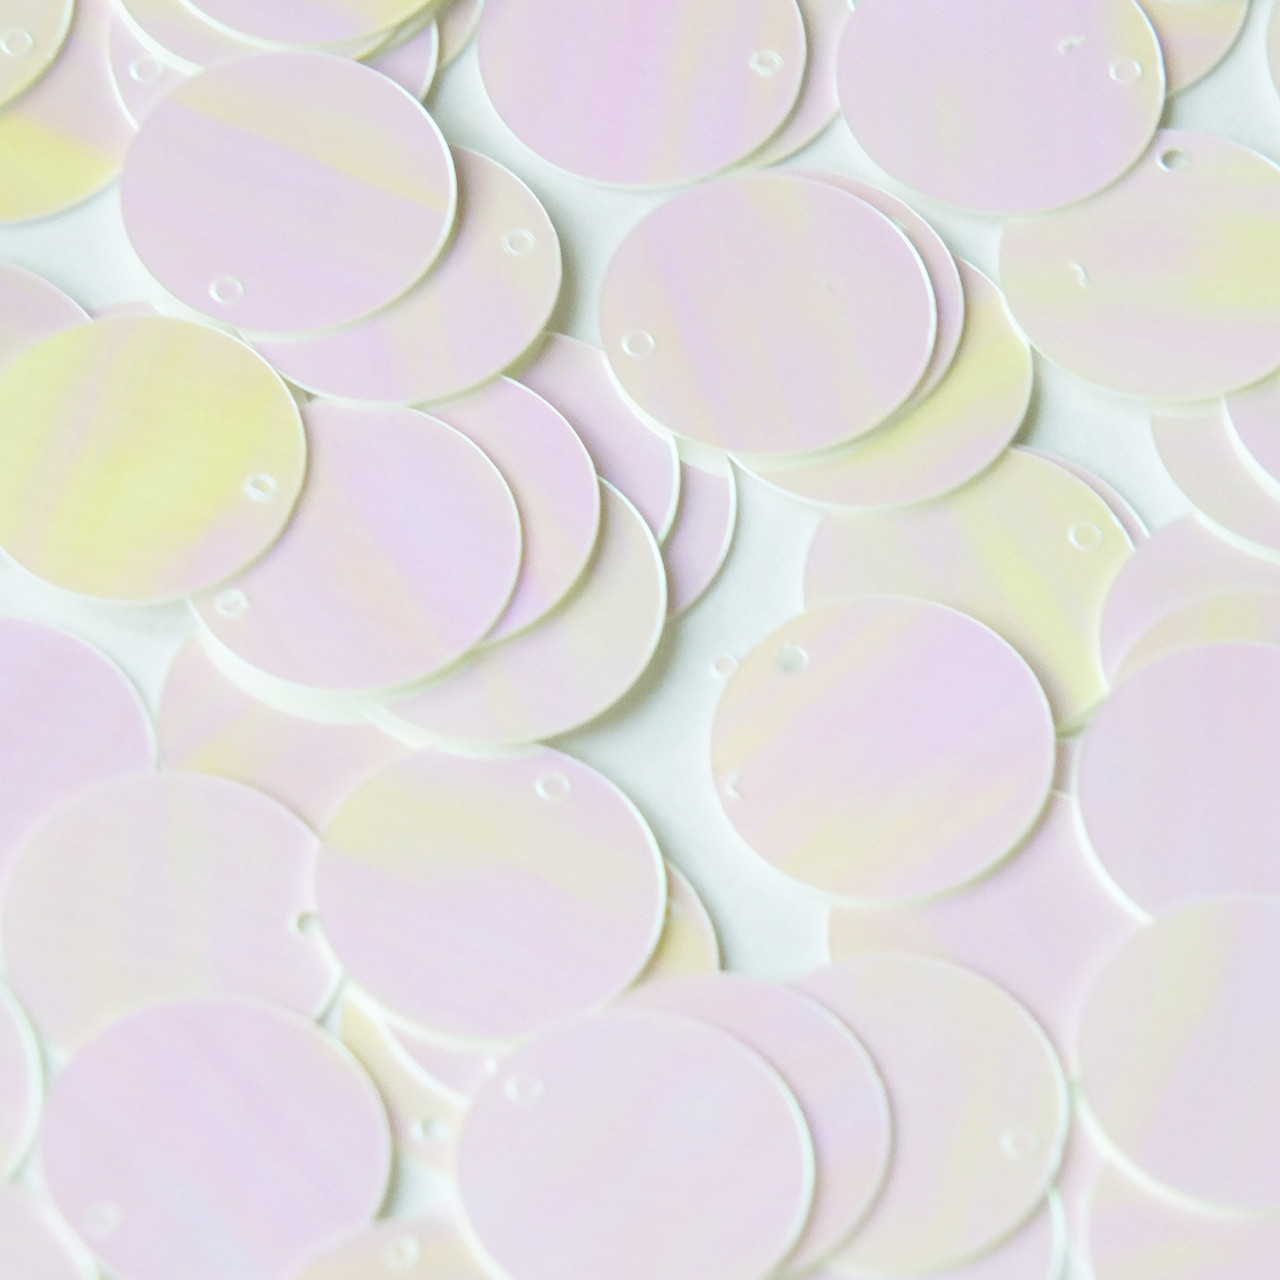 Round  Flat Sequin 18mm Top Hole White Pink Rainbow Iris Fluorescent Shiny Opaque Back Reversible